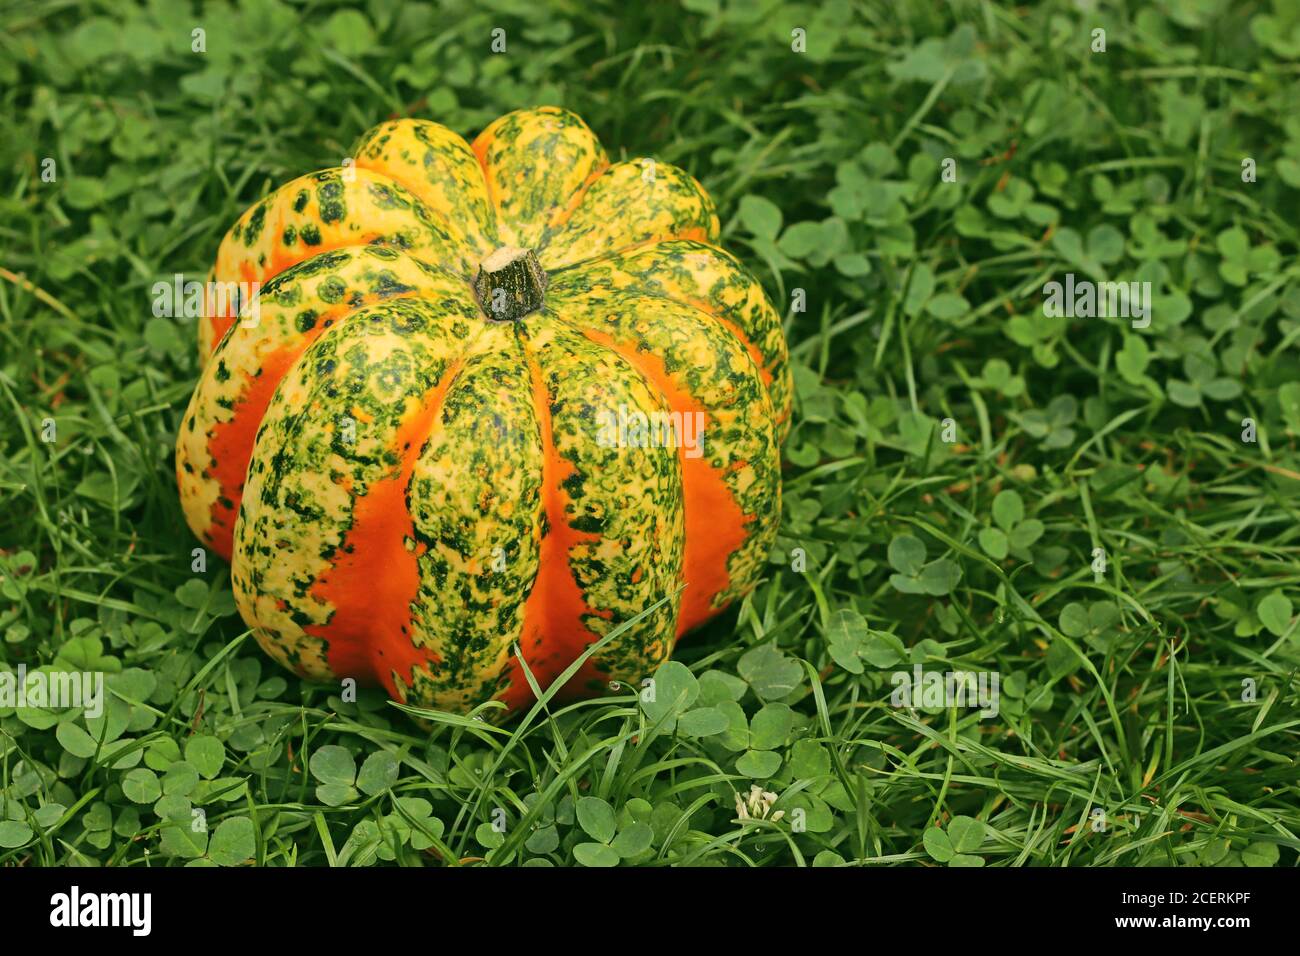 close-up of a multi colored chameleon pumpkin on grass Stock Photo